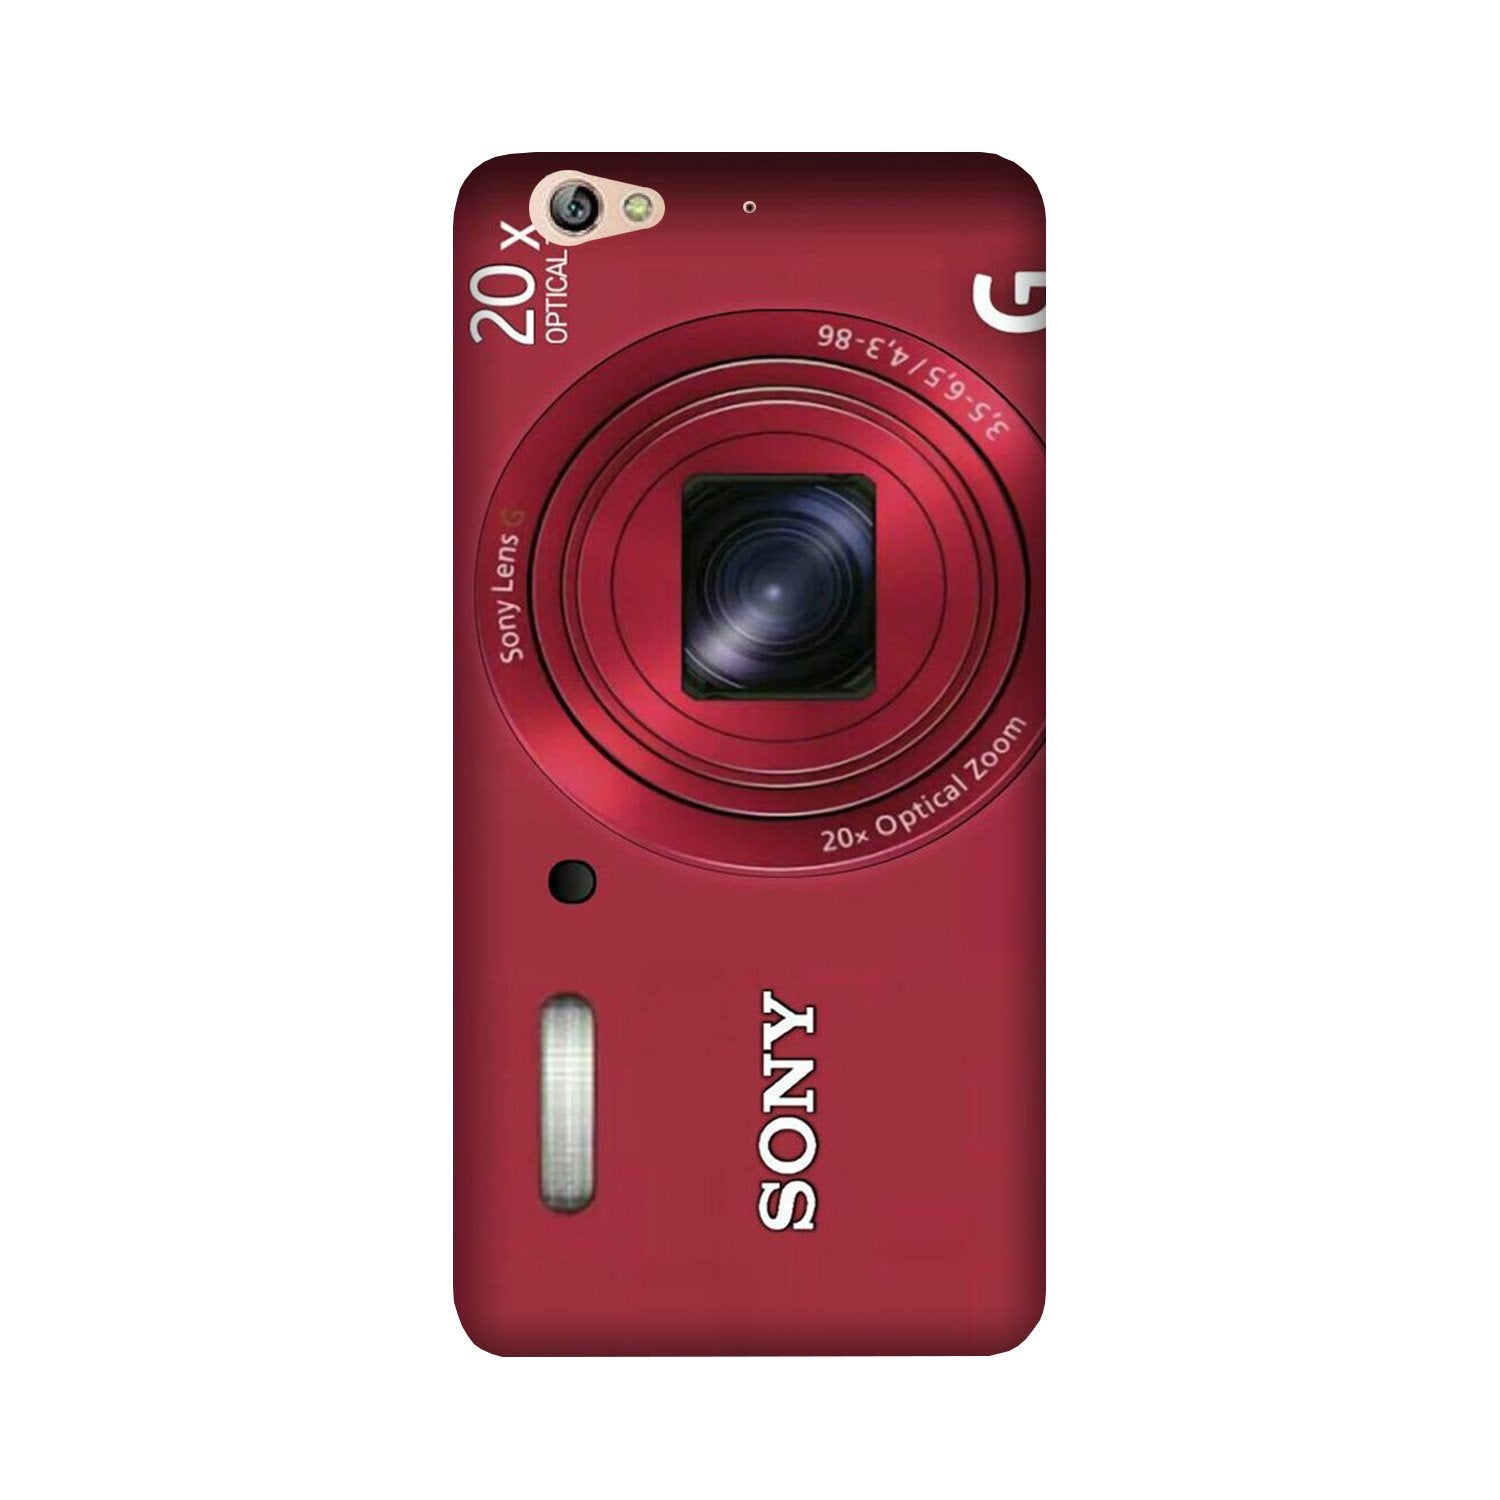 Sony Case for Gionee S6 (Design No. 274)